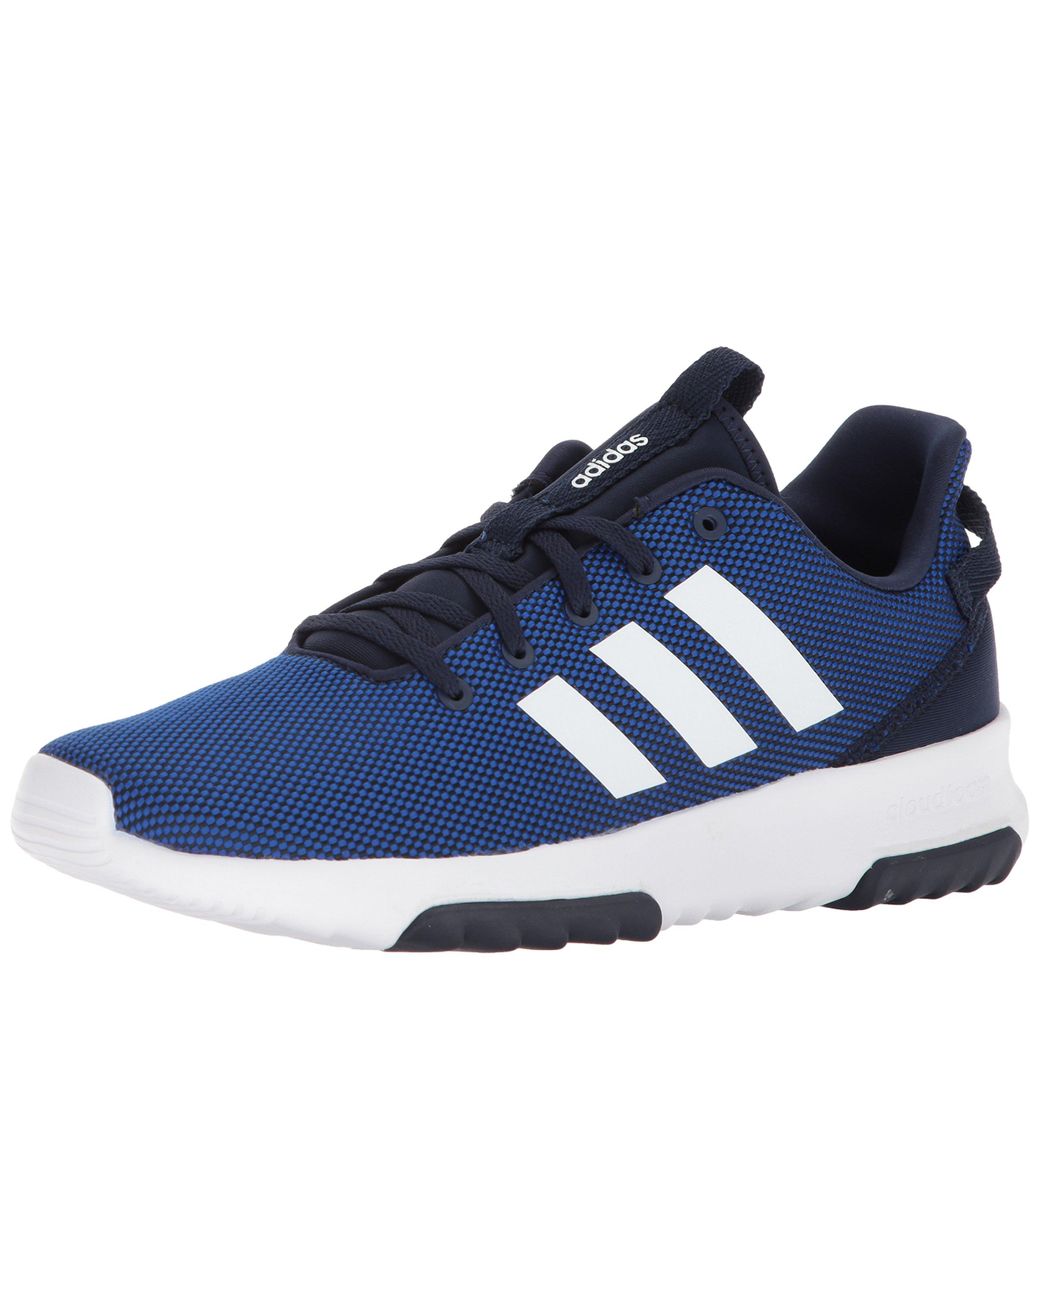 adidas Rubber Cf Racer Tr in Blue/Black 